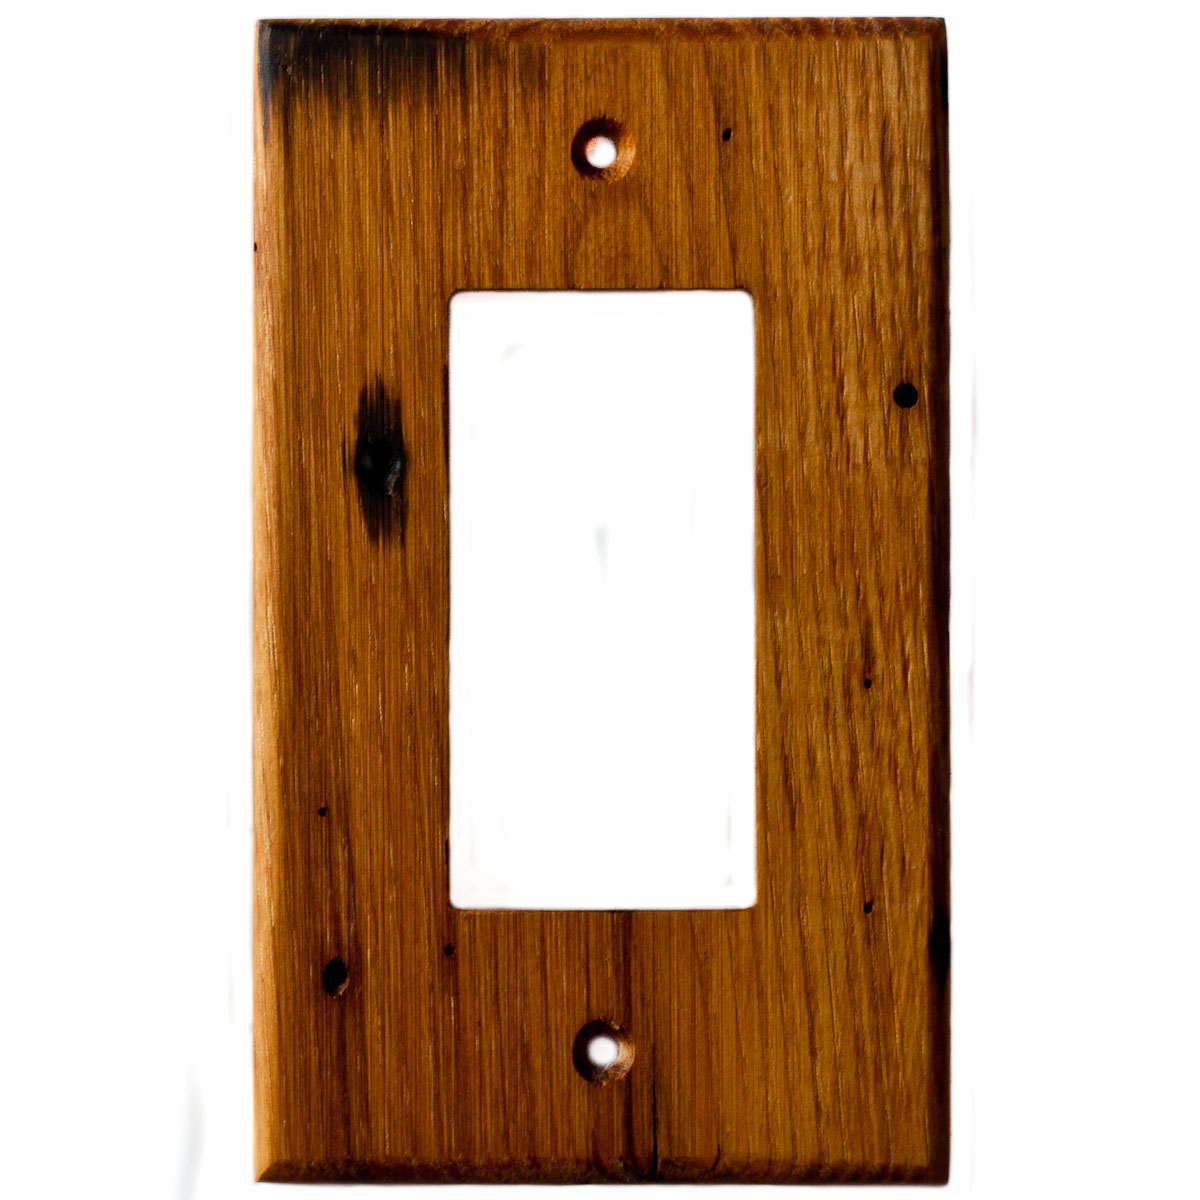 Wormy Chestnut Reclaimed Wood Wall Plate - 1 Gang GFCI Outlet Cover -  Virgin Timber Lumber